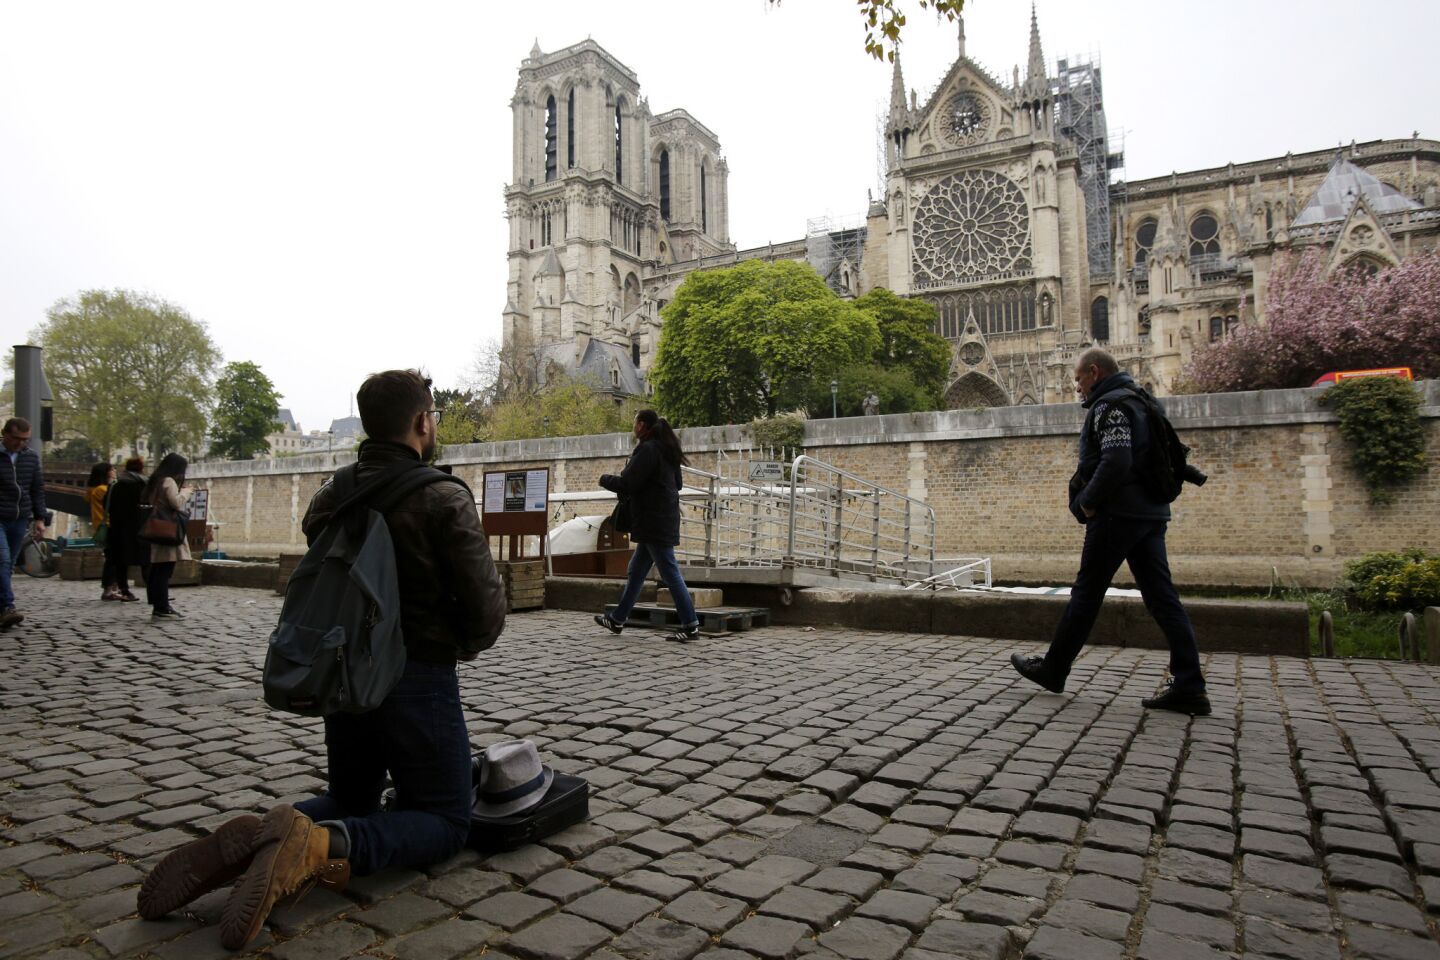 Visitors came to see and photograph the damage at Notre Dame.